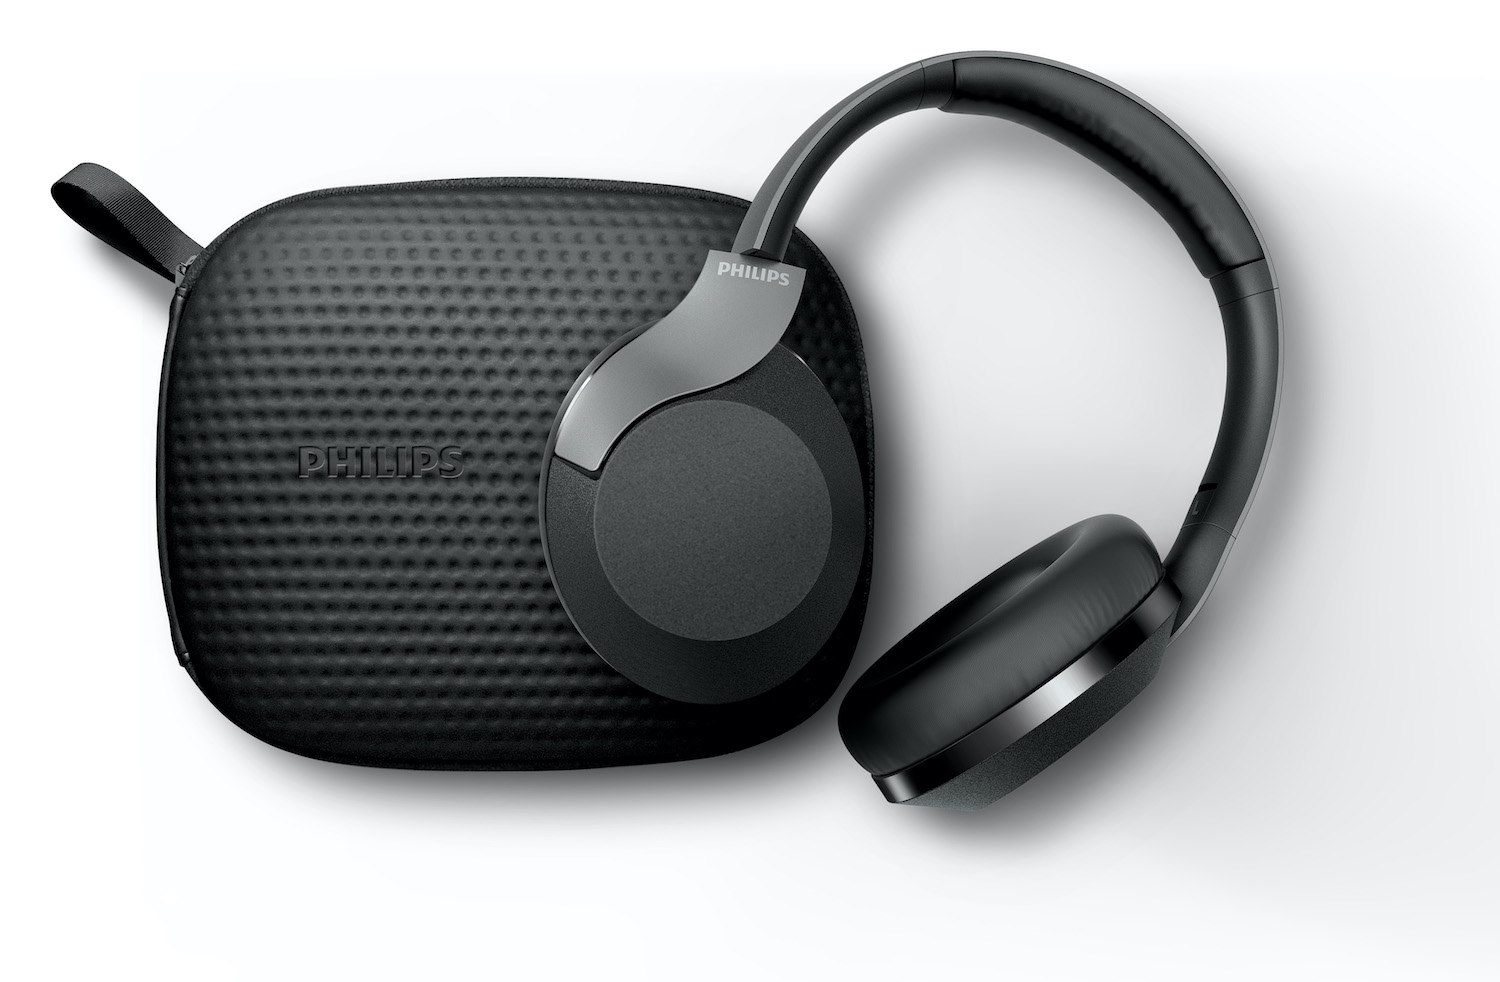 ritme nachtmerrie Spotlijster Review Philips PH805 betaalbare noise cancelling